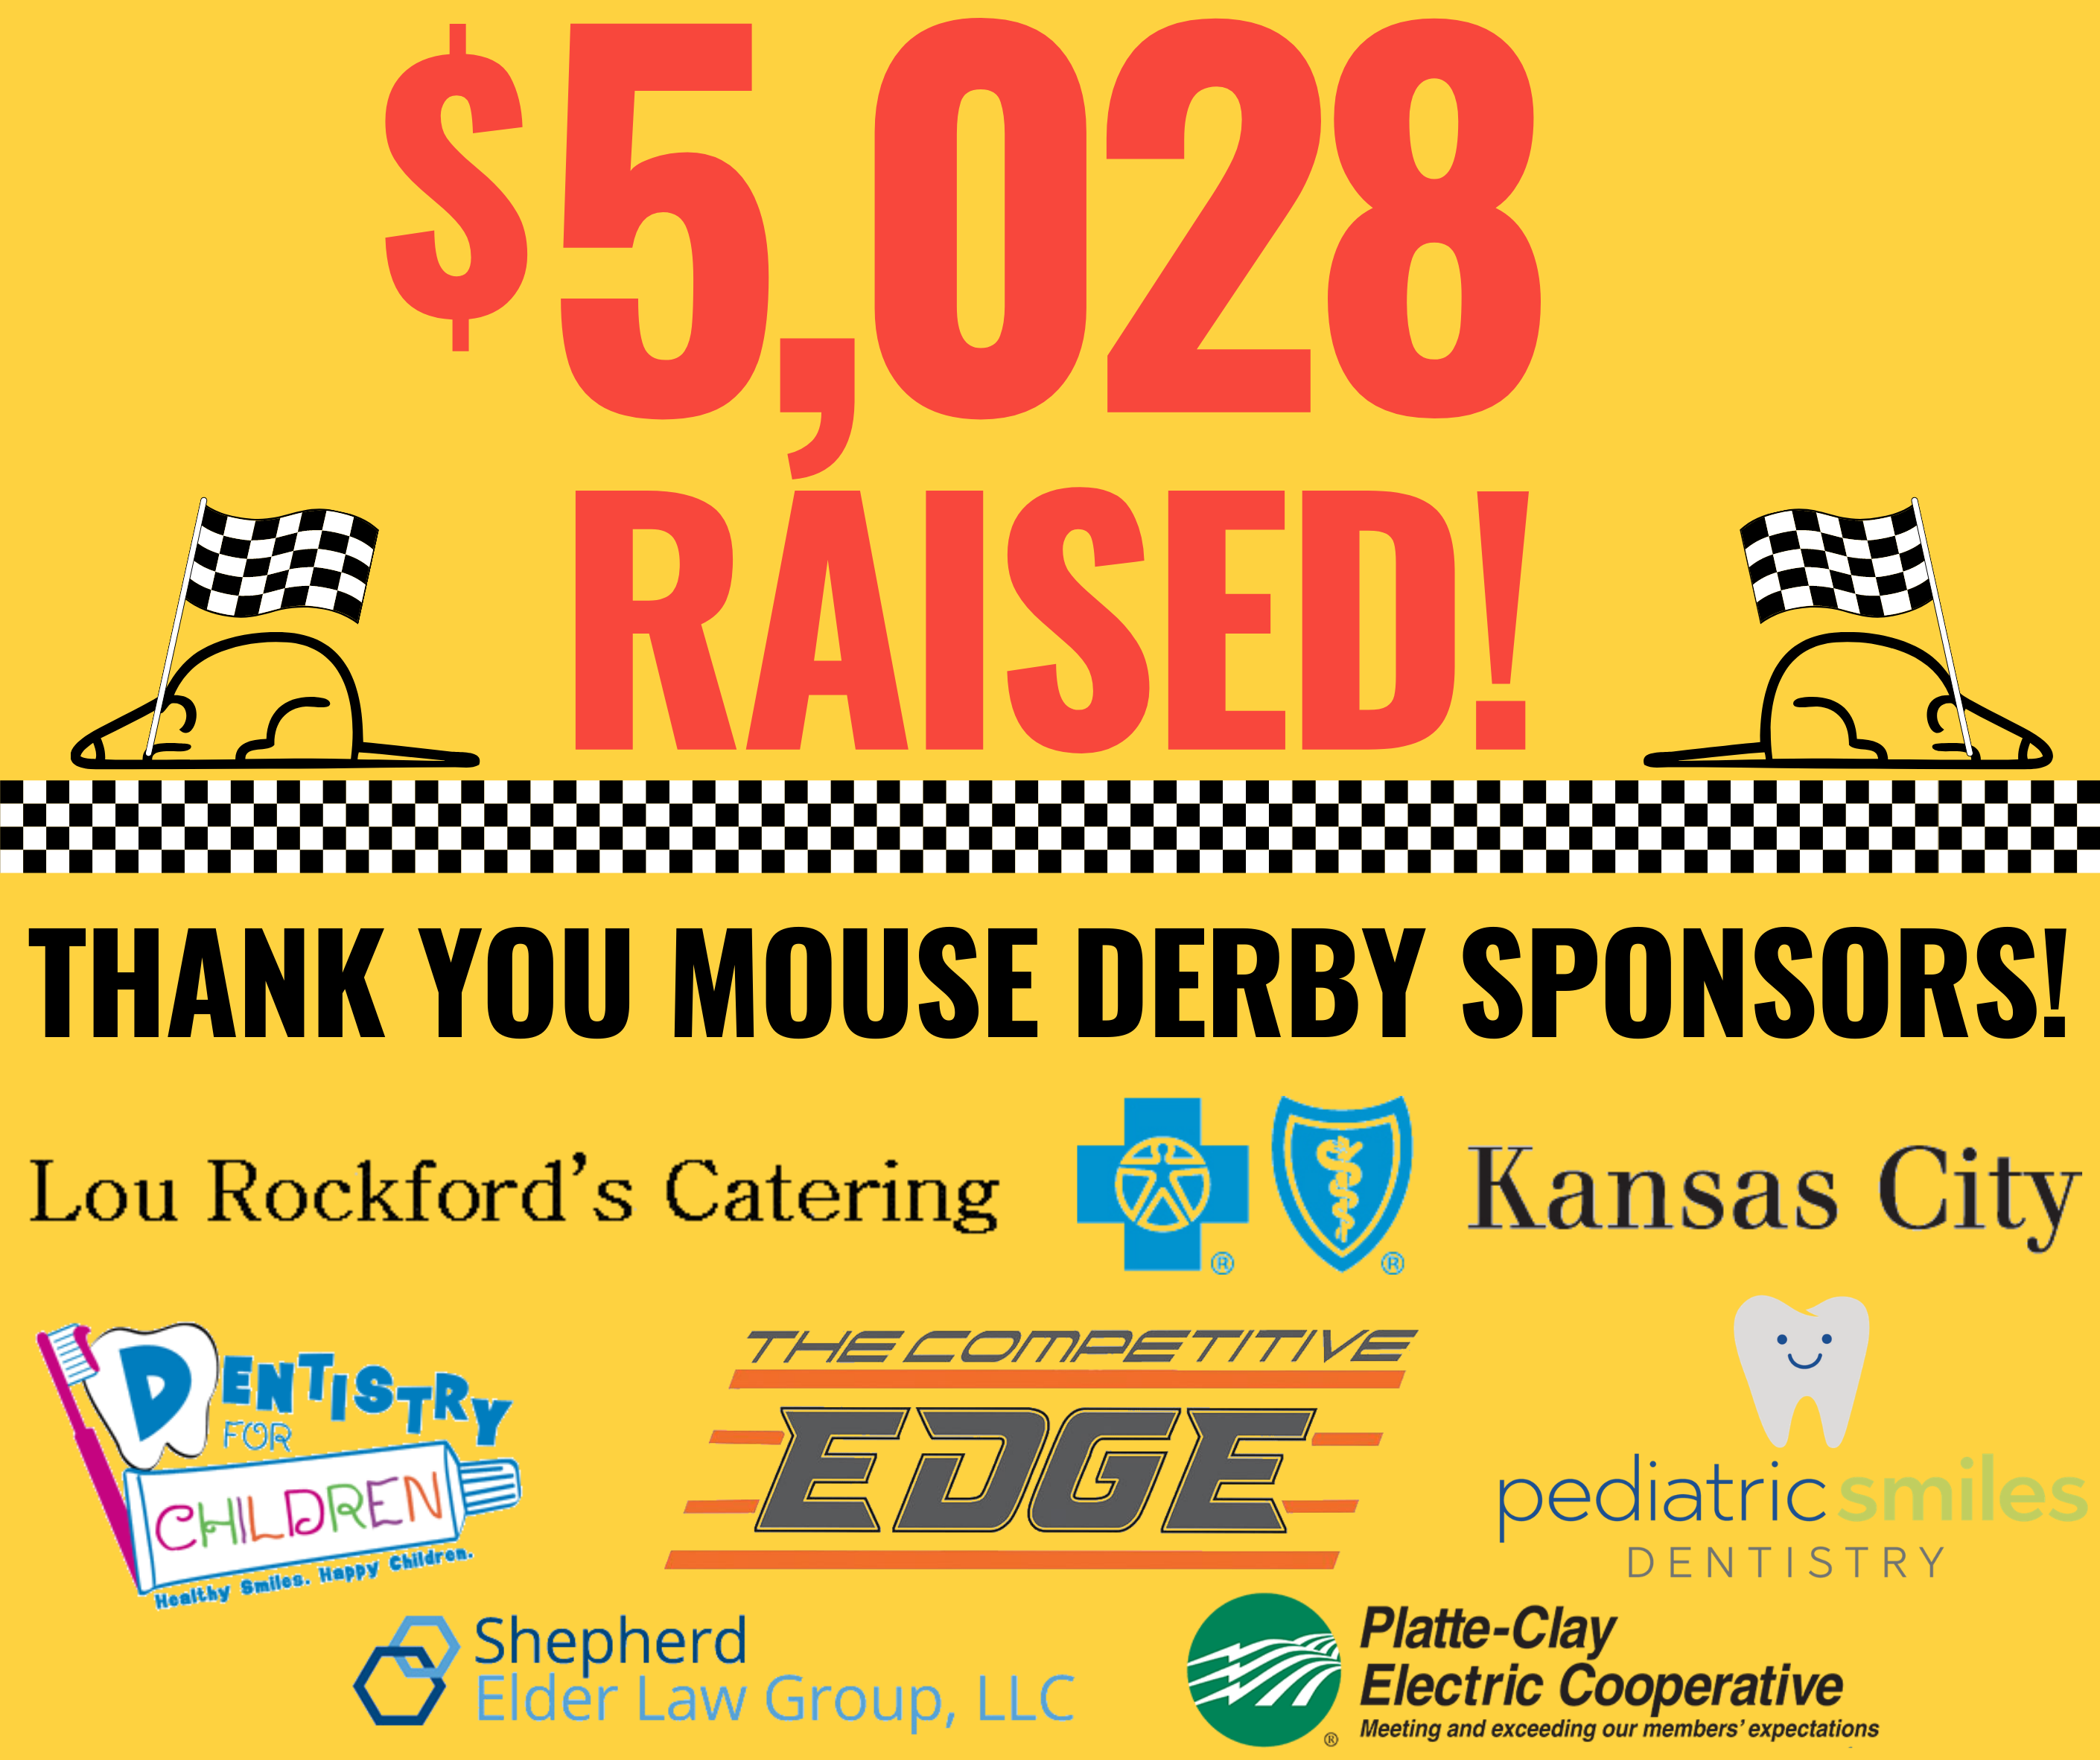 Thank you Sponsors of the 2nd Annual Northland Mouse Derby!